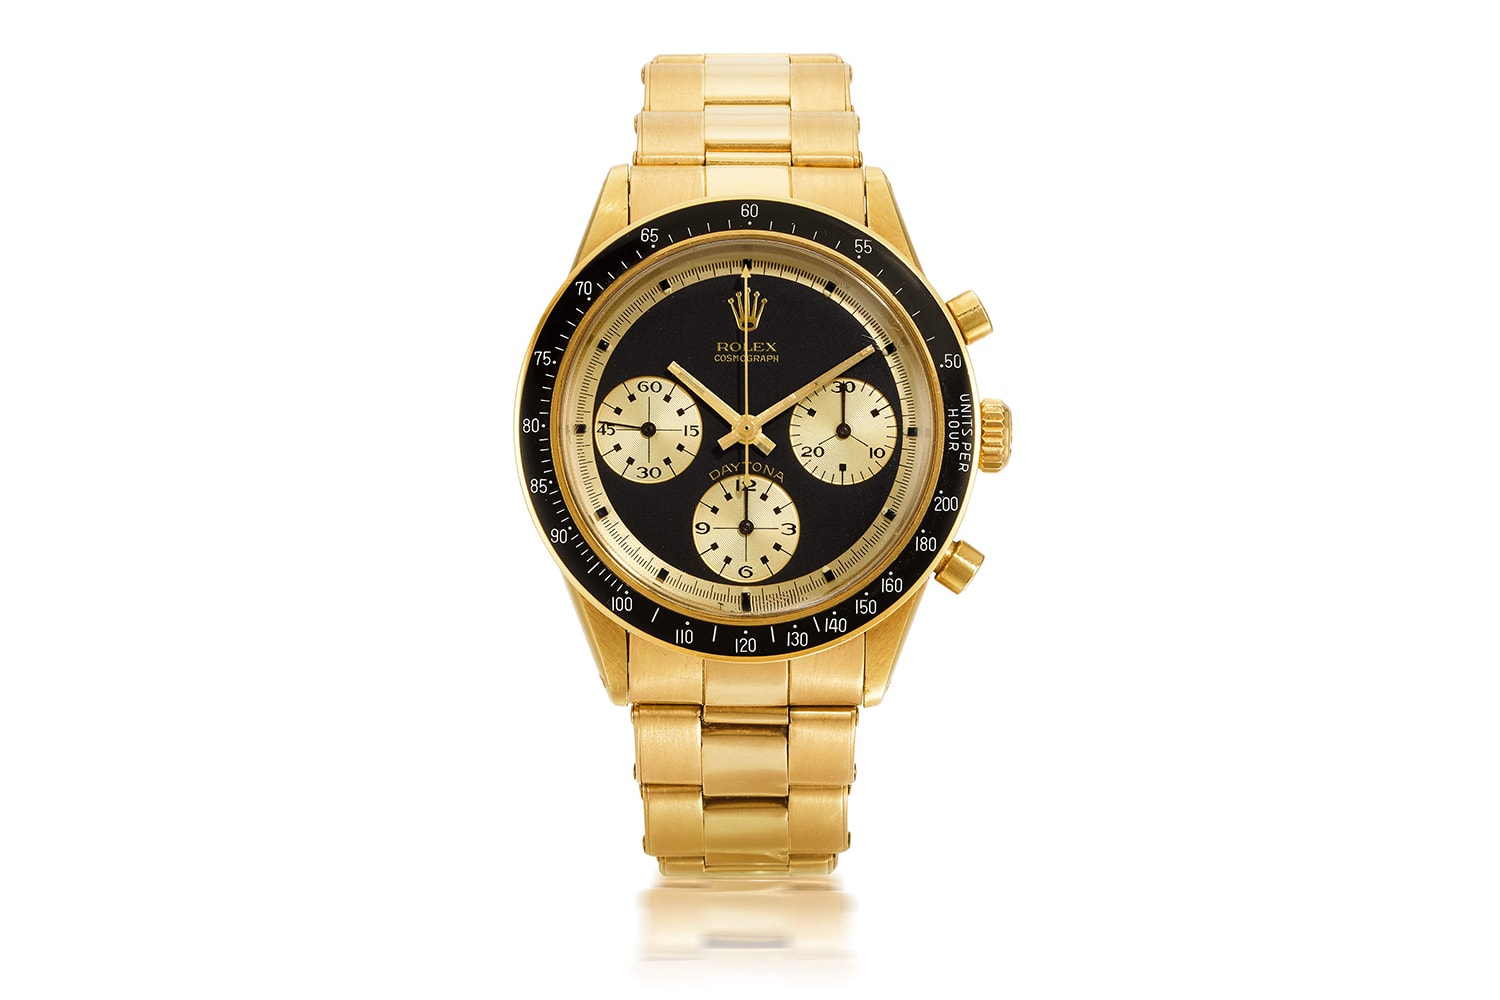 Rolex Daytona 6264 John Player Special Sells For Record $1.5 Million USD auctions records millions price gold 18k